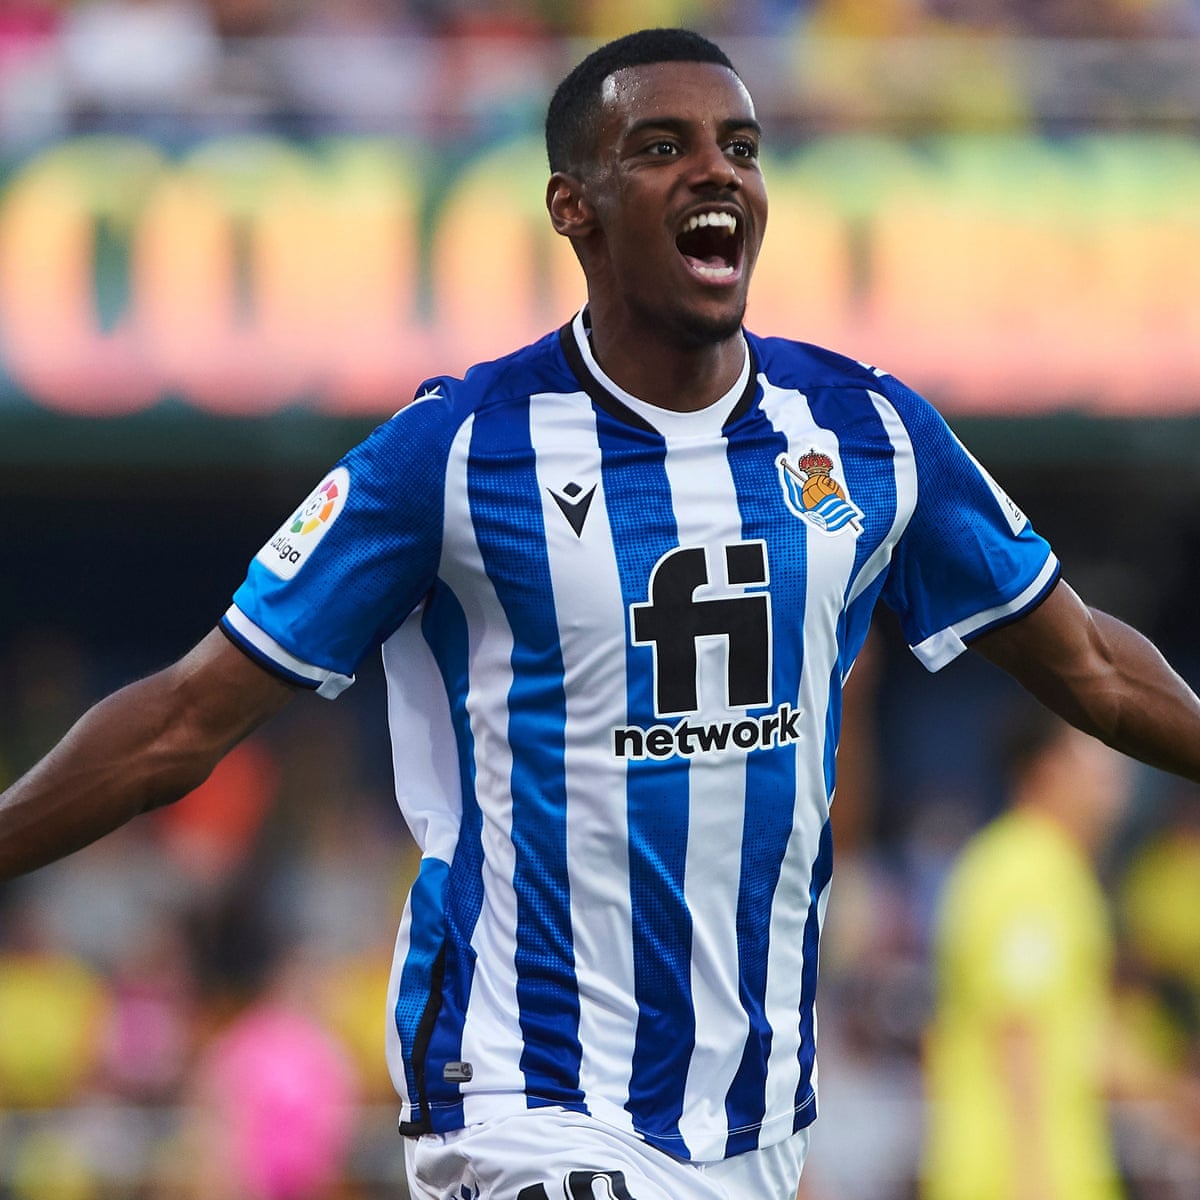 Newcastle poised to spend record £59m on Real Sociedad's Alexander Isak |  Newcastle United | The Guardian